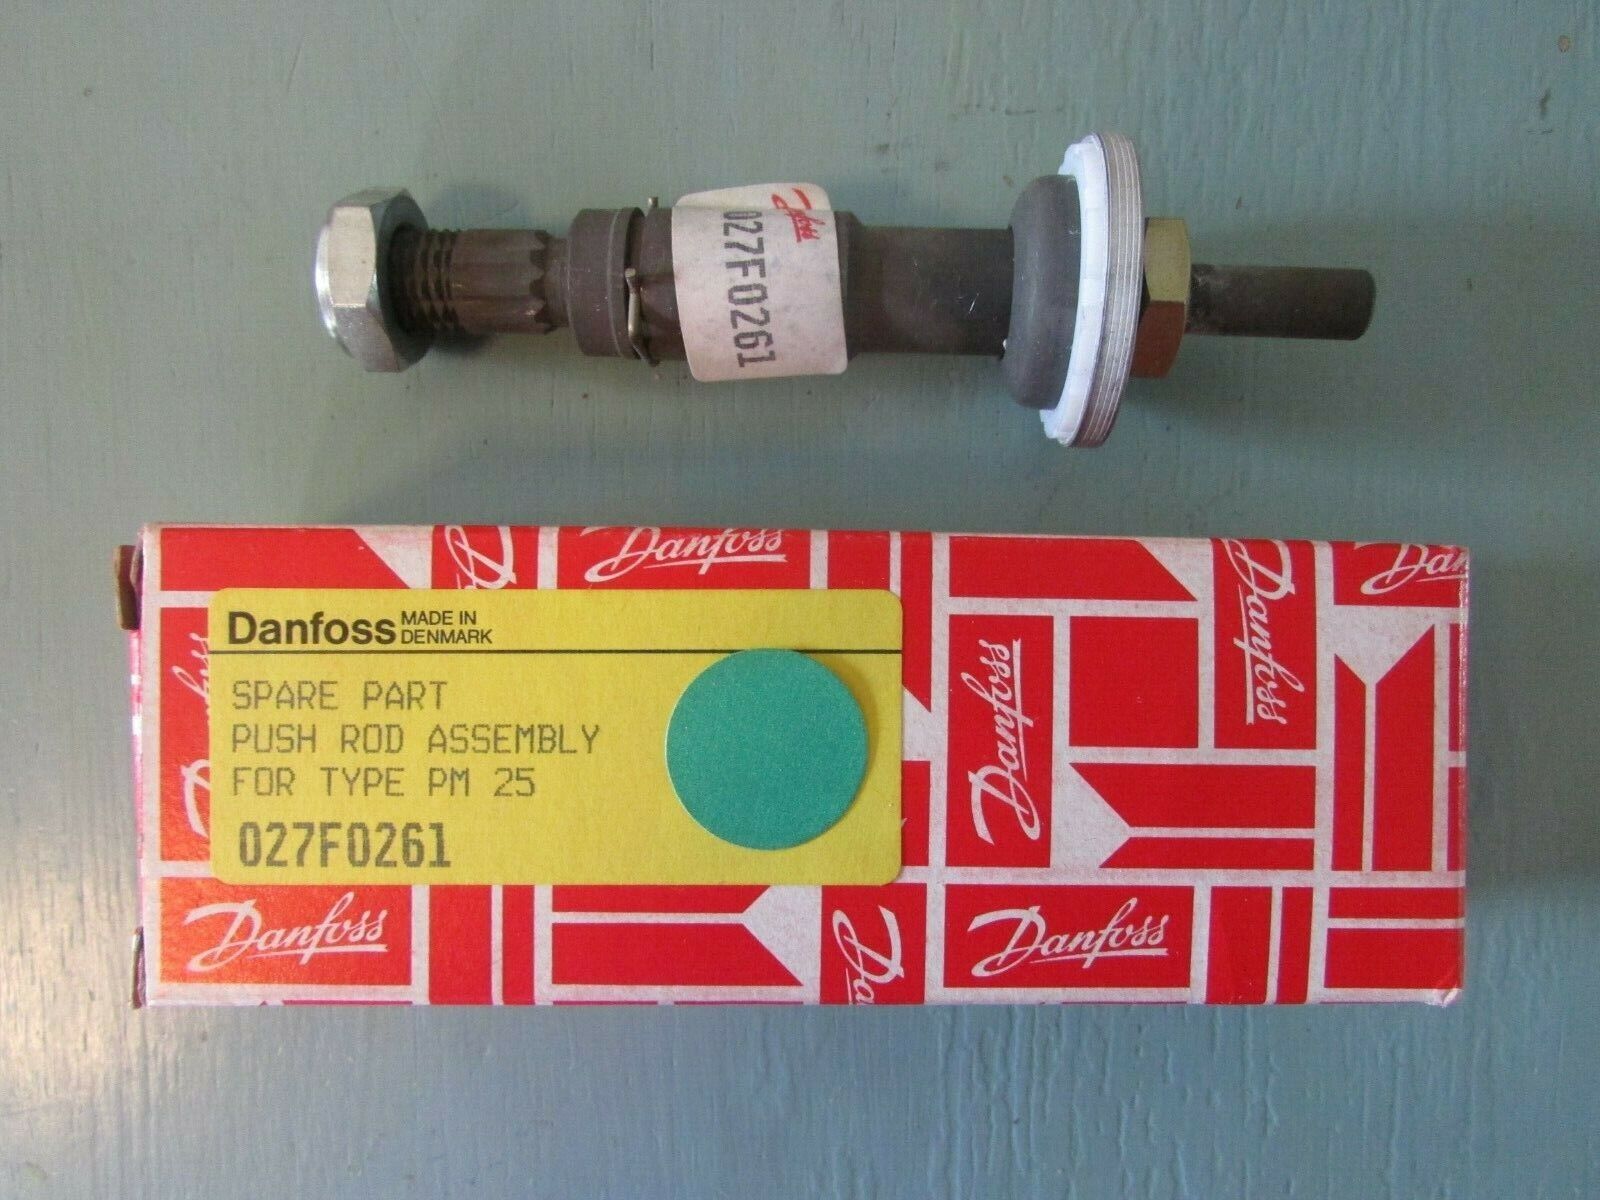 Danfoss 027F0261 Push Rod Assembly for Type PM25